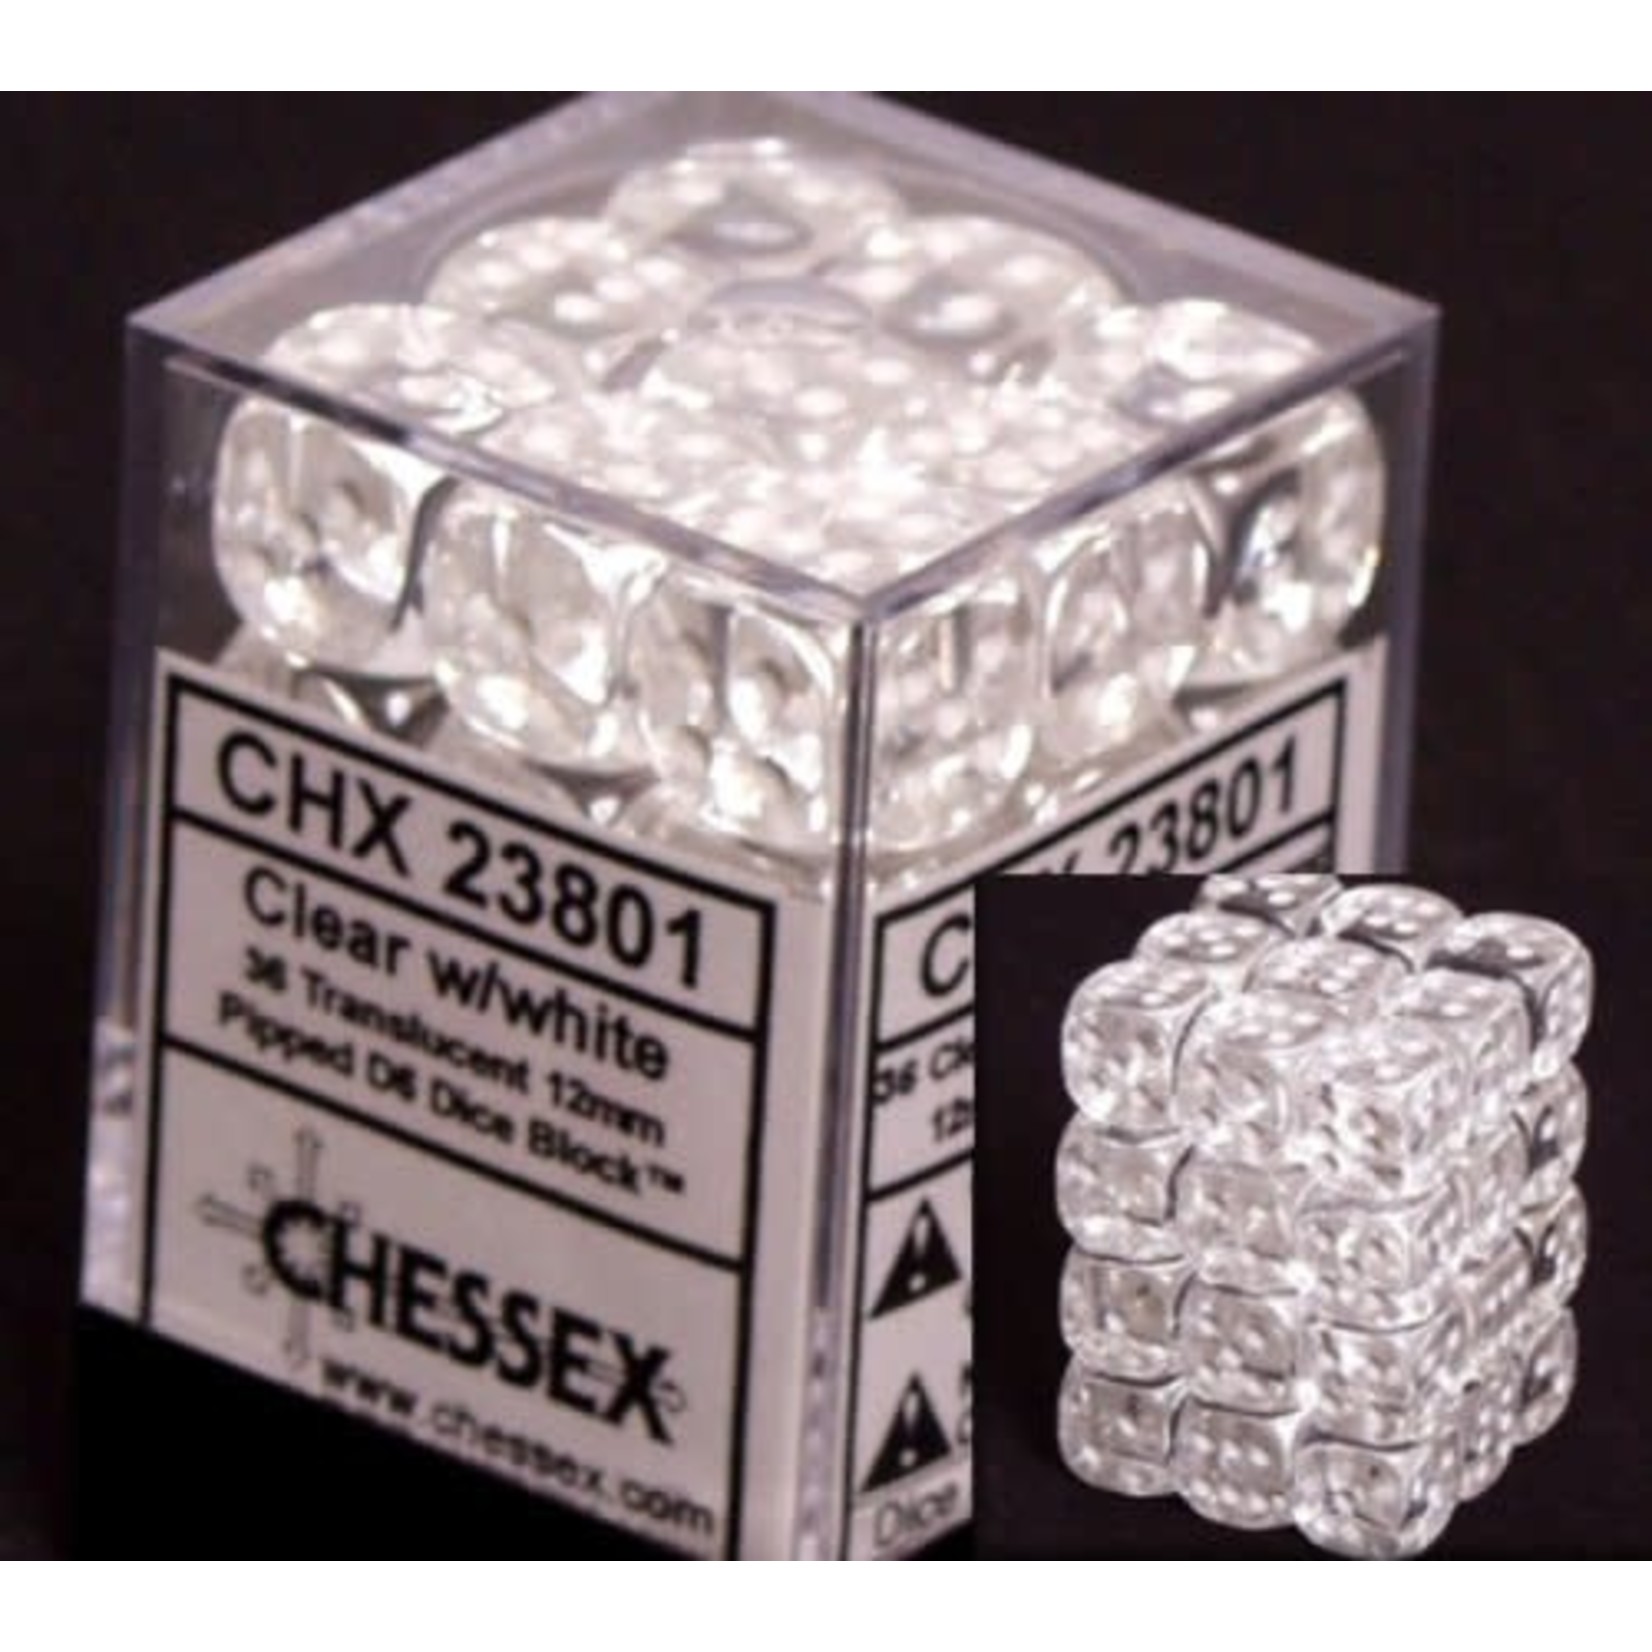 Chessex Translucent d6 Clear white 12mm (36)